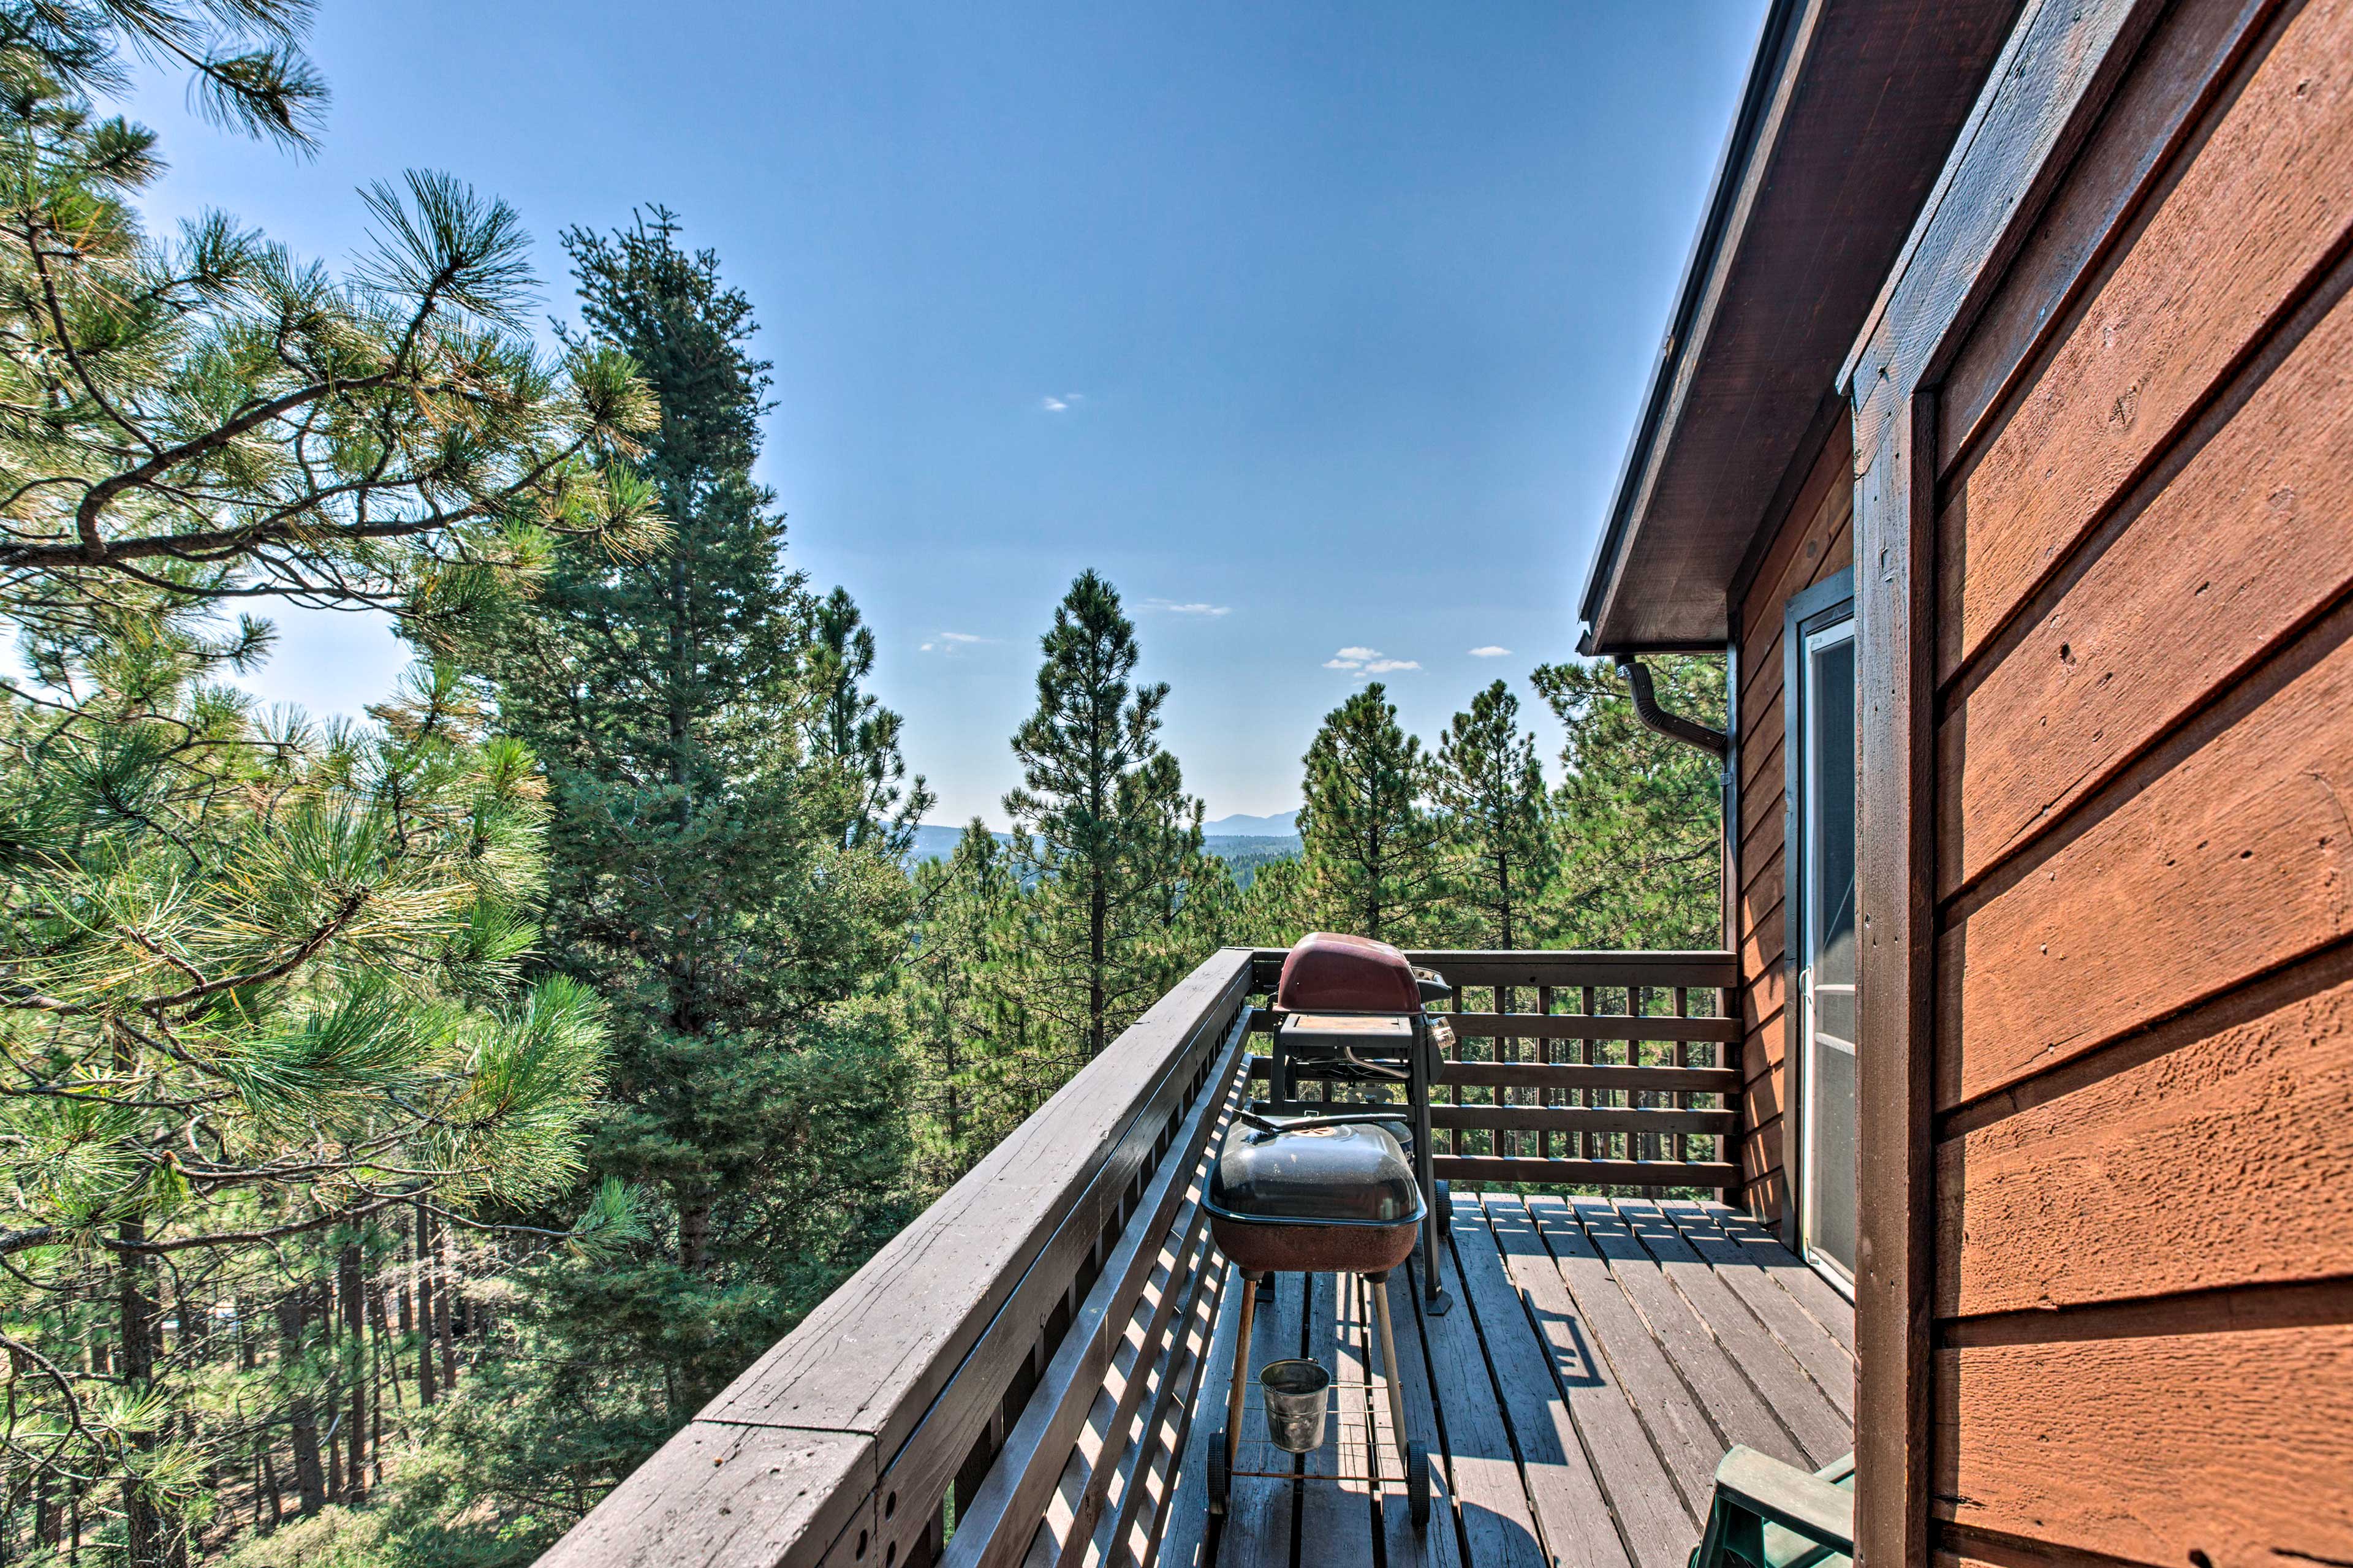 Balcony | 2,483 Sq Ft | Private Entry to Coyote Trail Hiking